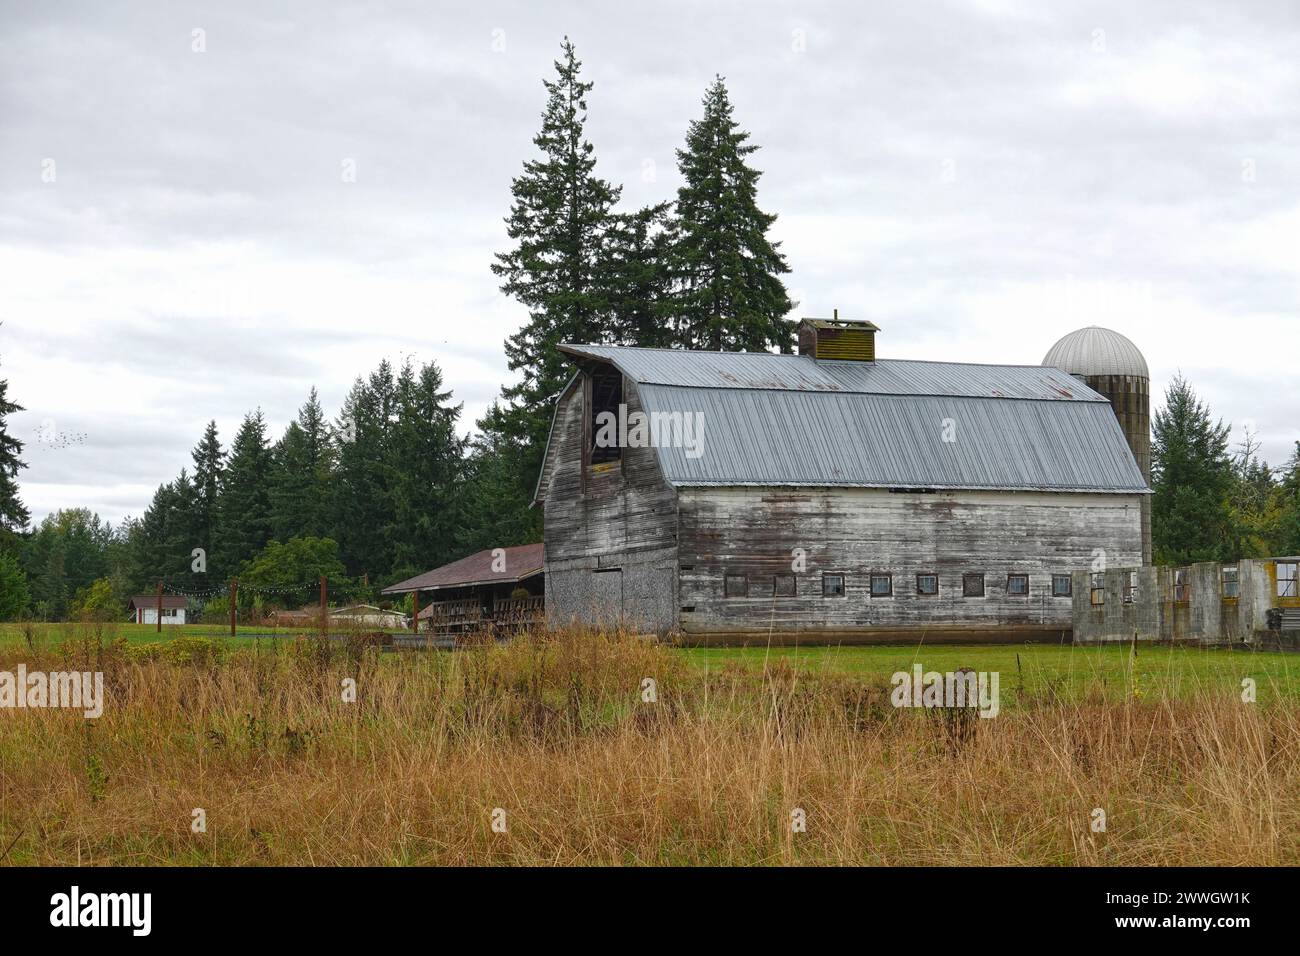 Old wooden barn and storage silo, USA Stock Photo